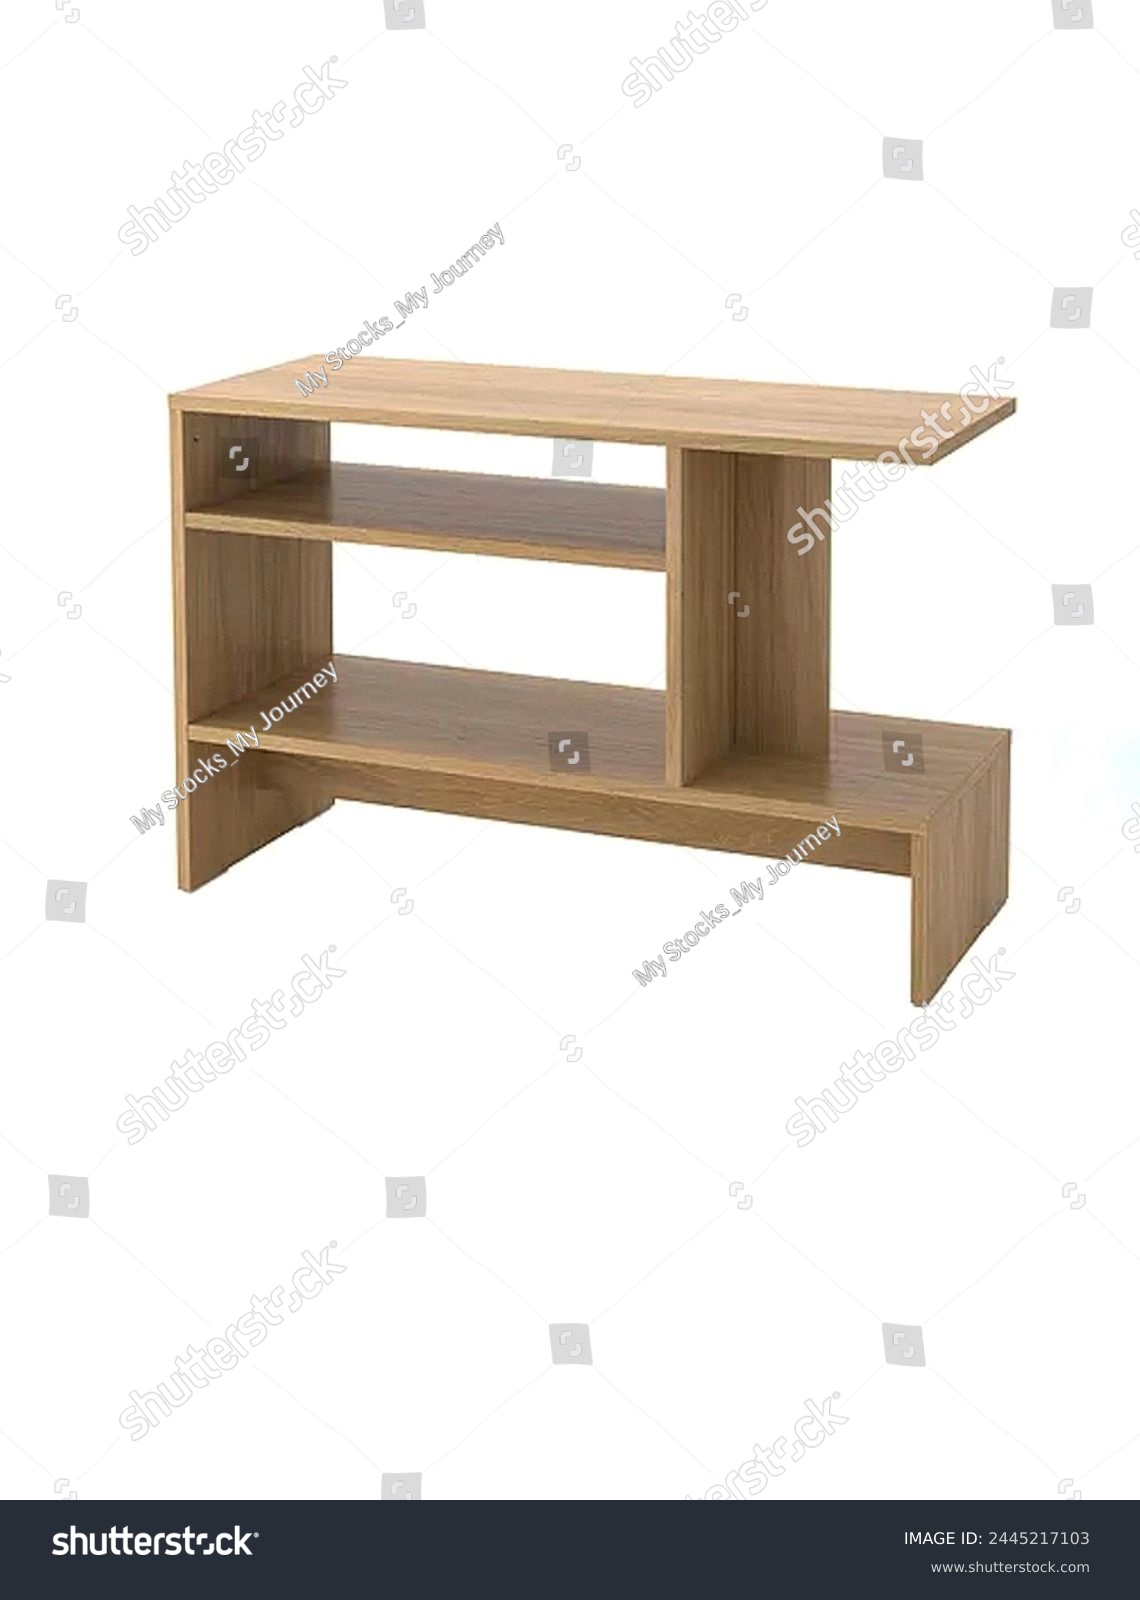 Furniture. Side table, rectangular top with three storeys made of oakwood in brown color. #2445217103